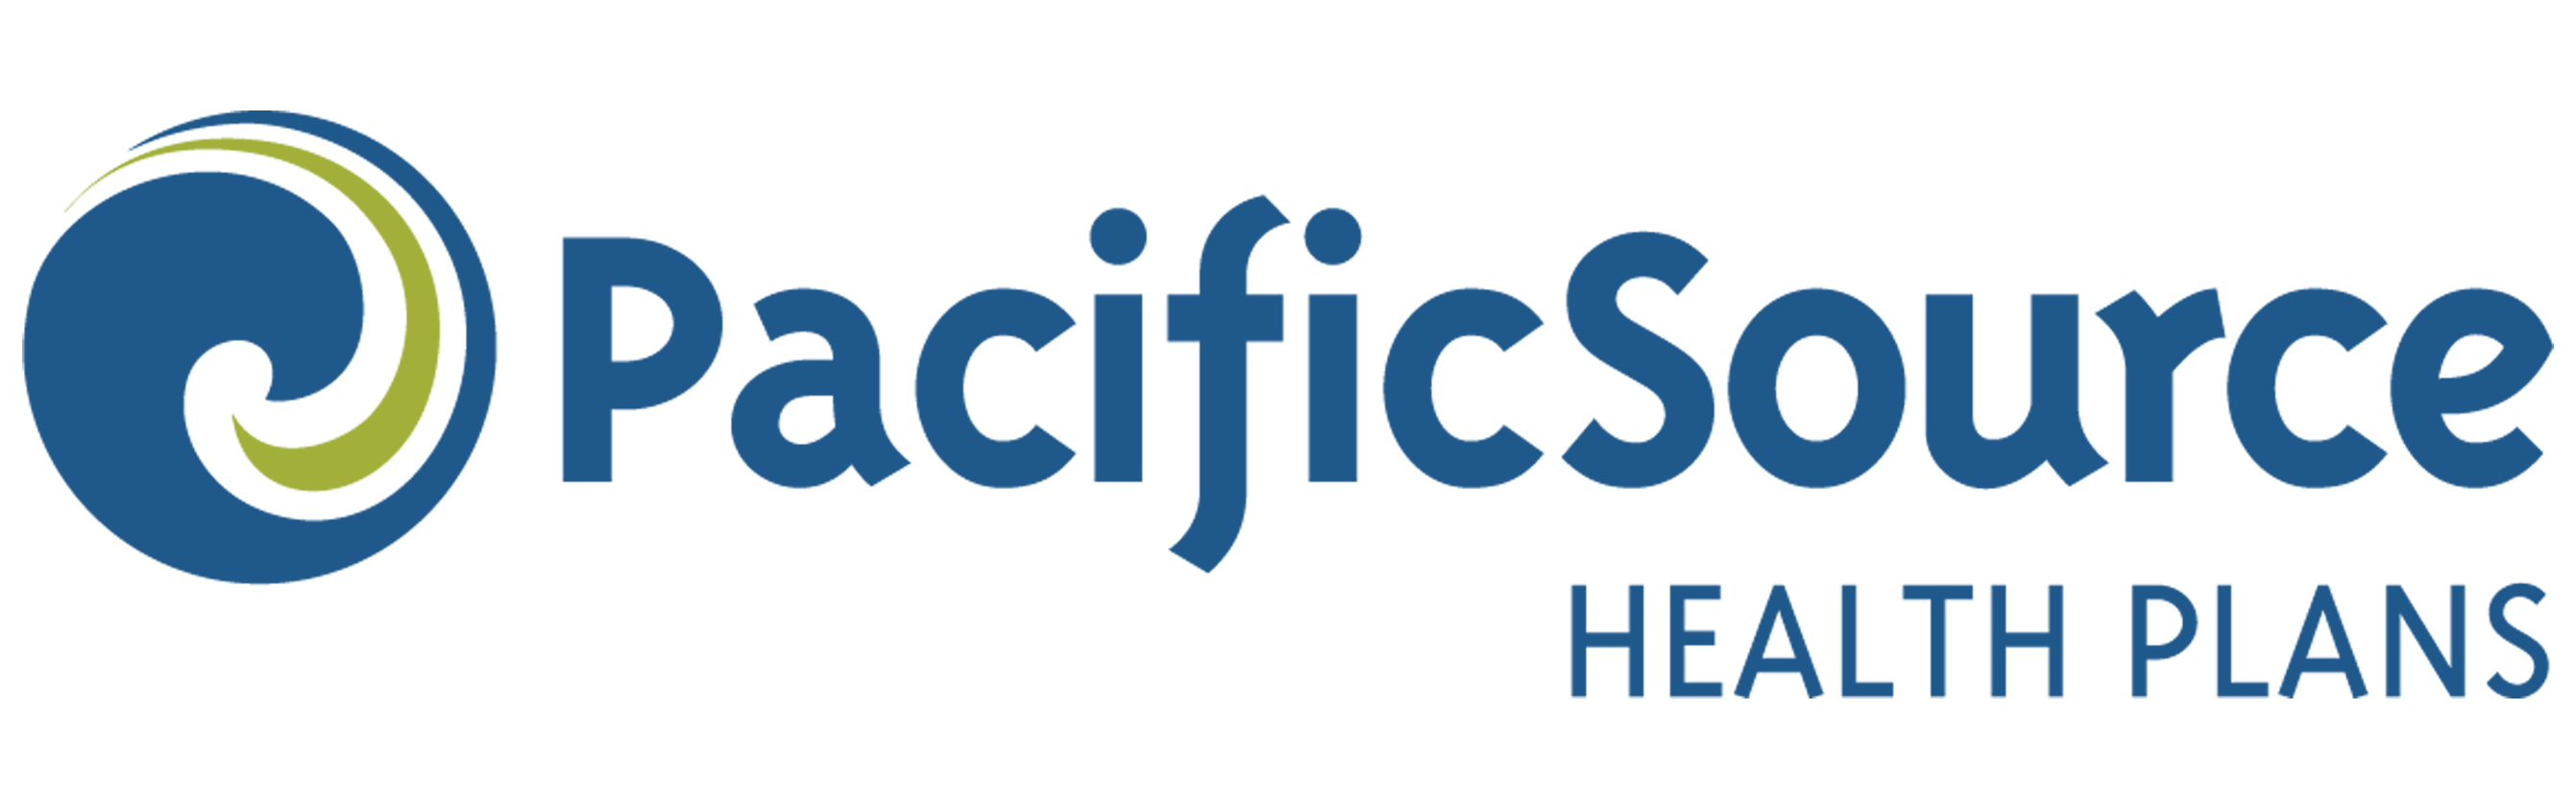 Pacific Source Health Plans